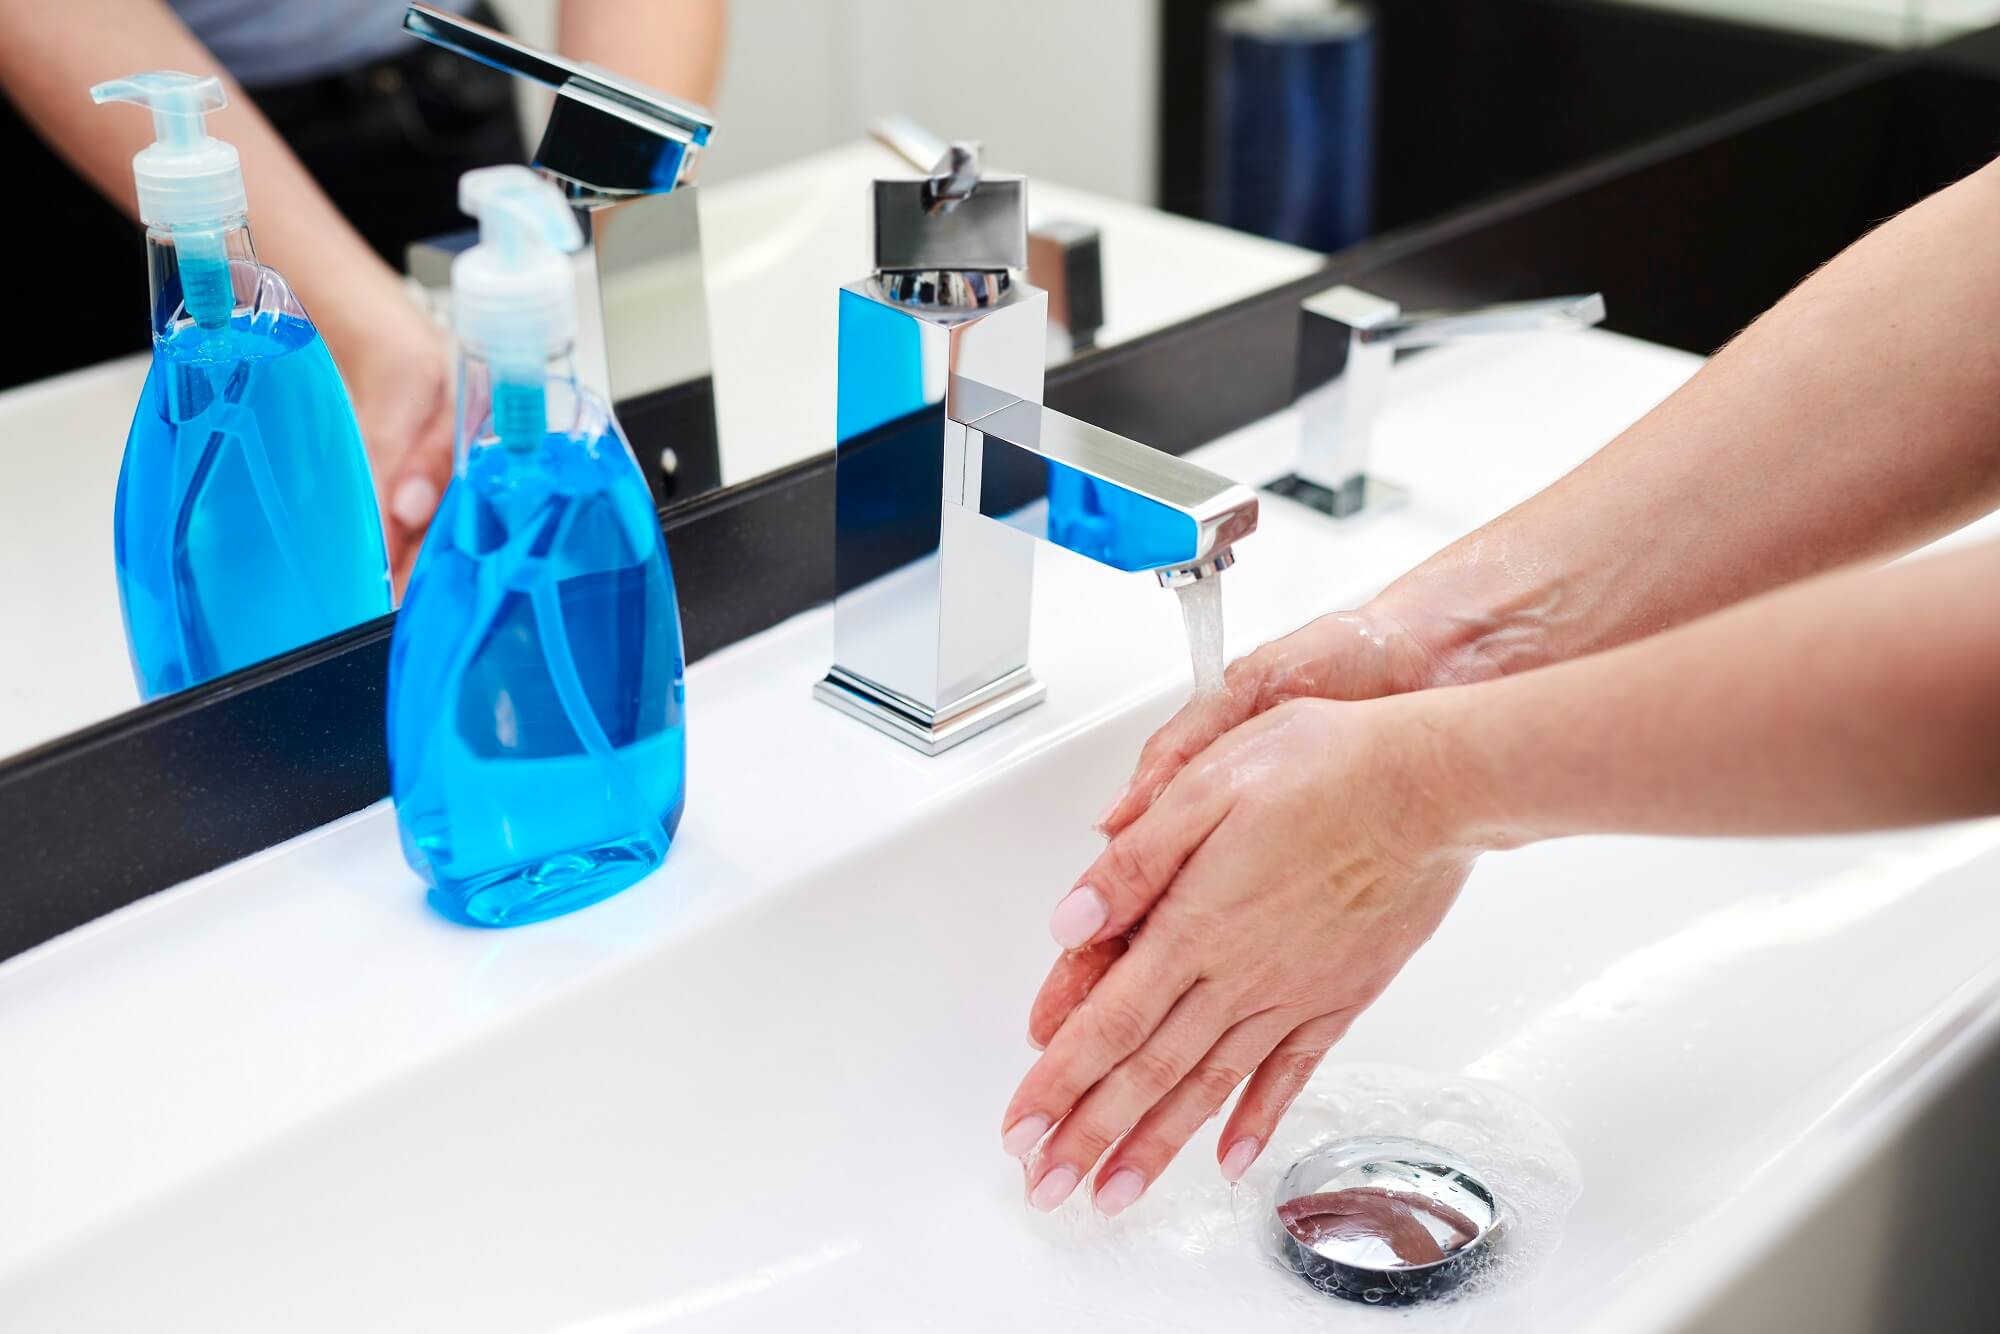 wetting hand before following hand hygiene steps